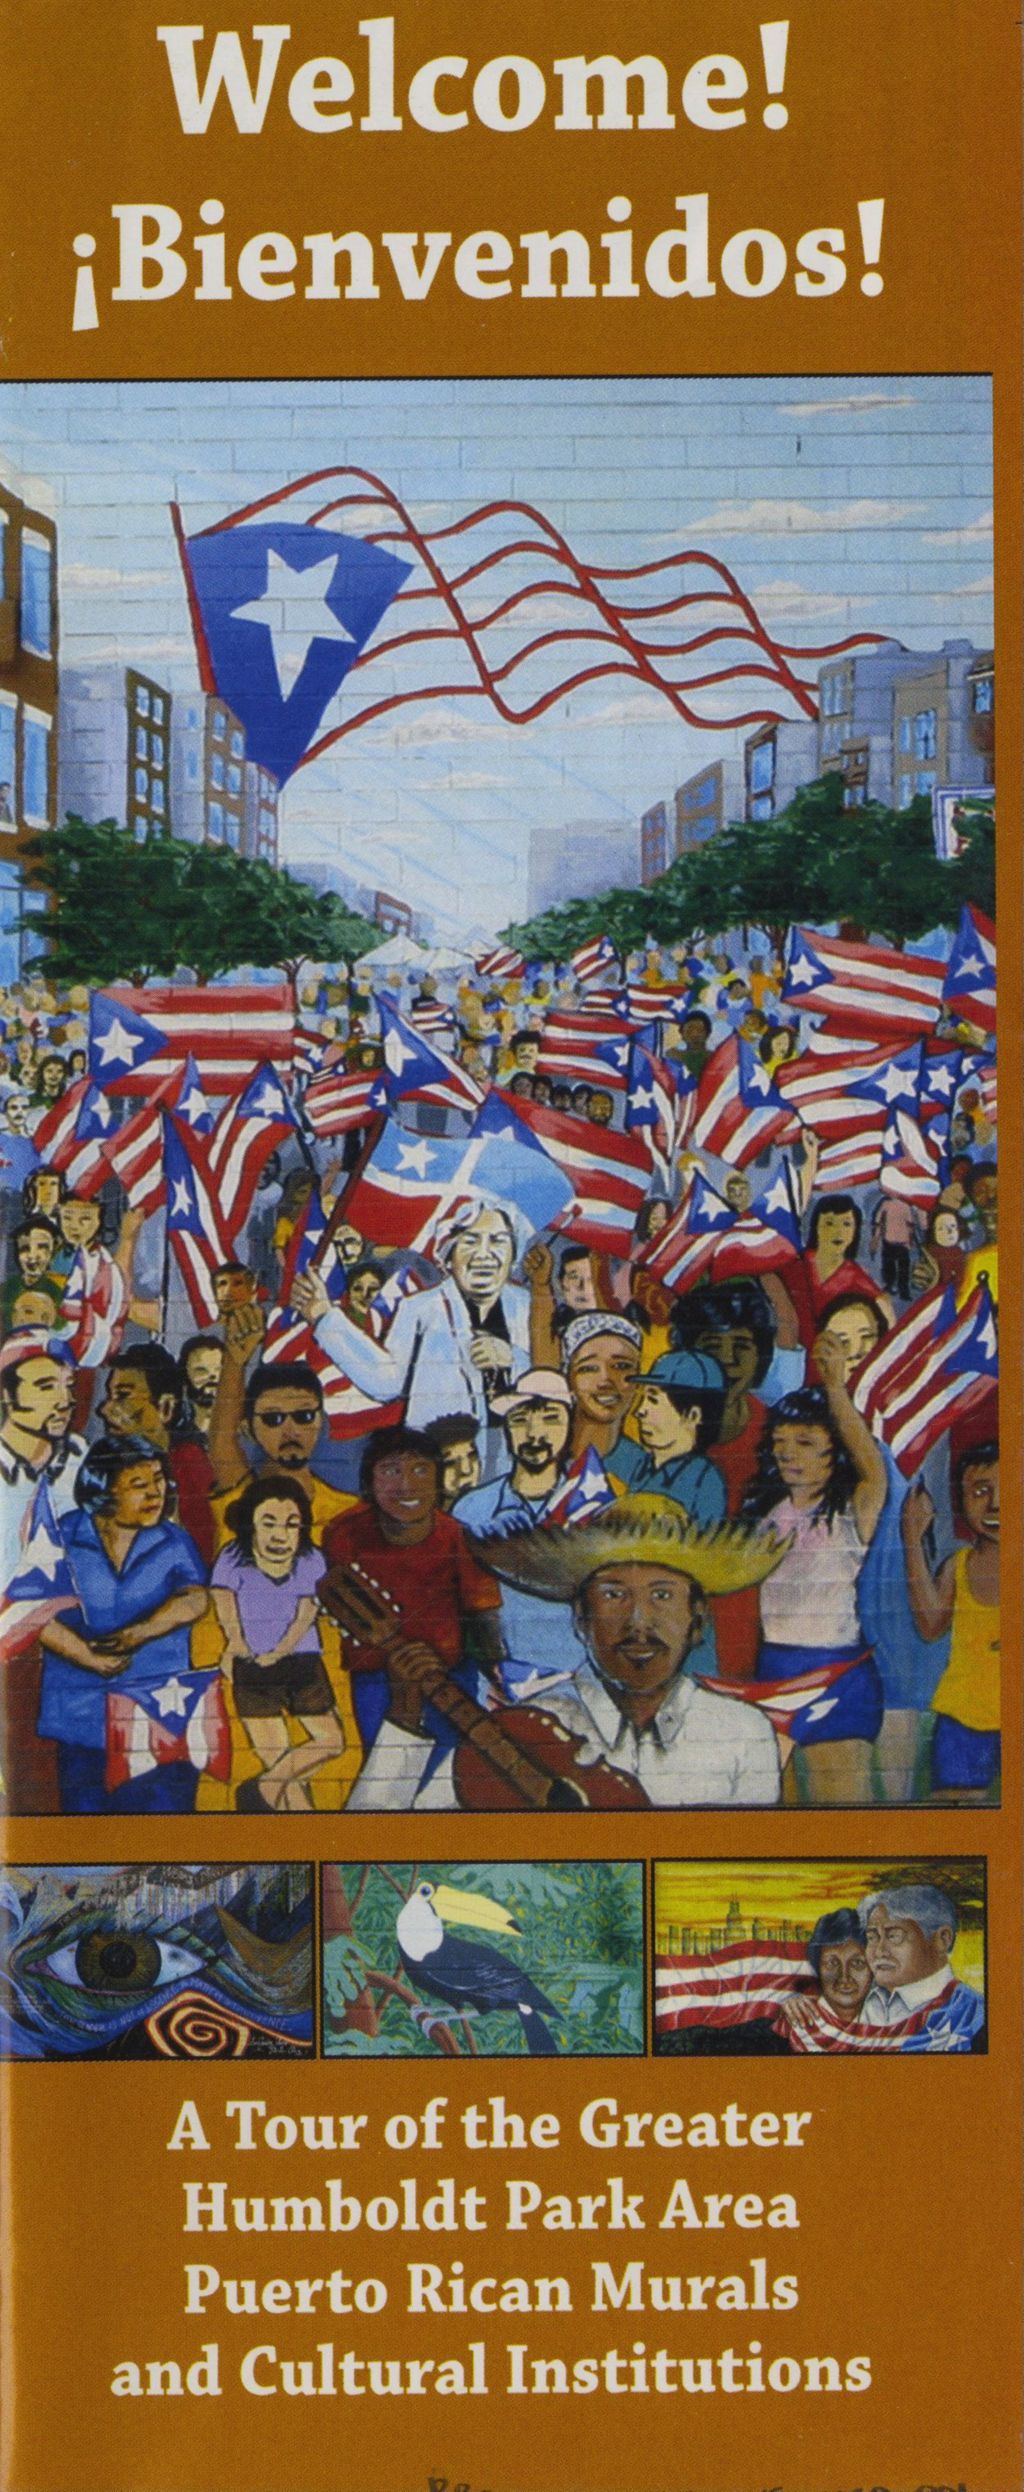 Welcome!¡ Bienvenidos! A Tour of the Greater Humboldt Park Area Puerto Rican Murals and Cultural Institutions